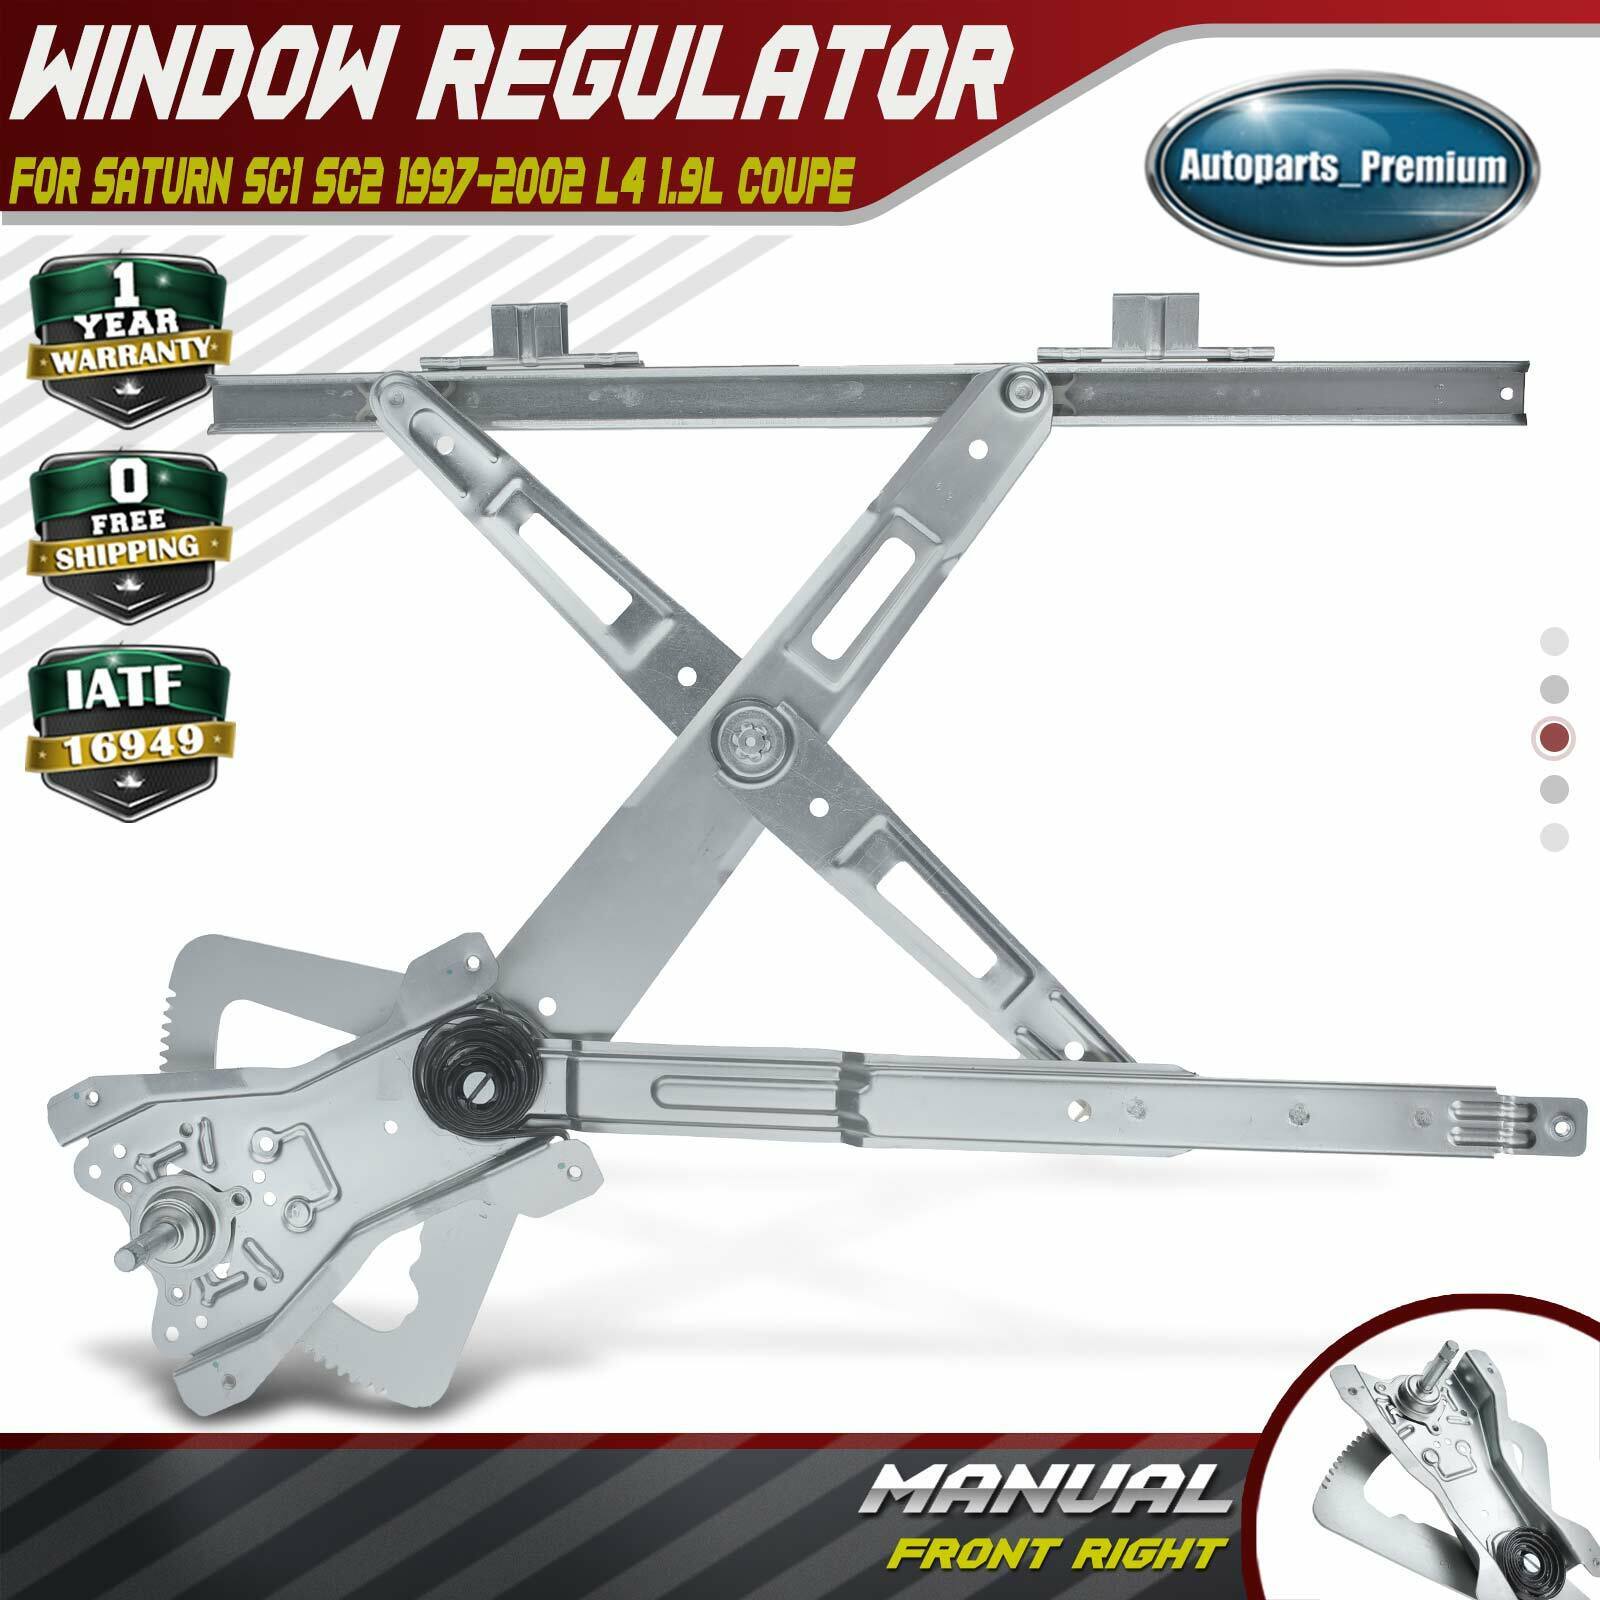 Manual Window Regulator for Saturn SC1 SC2 1997-2002 L4 1.9L Coupe Front Right